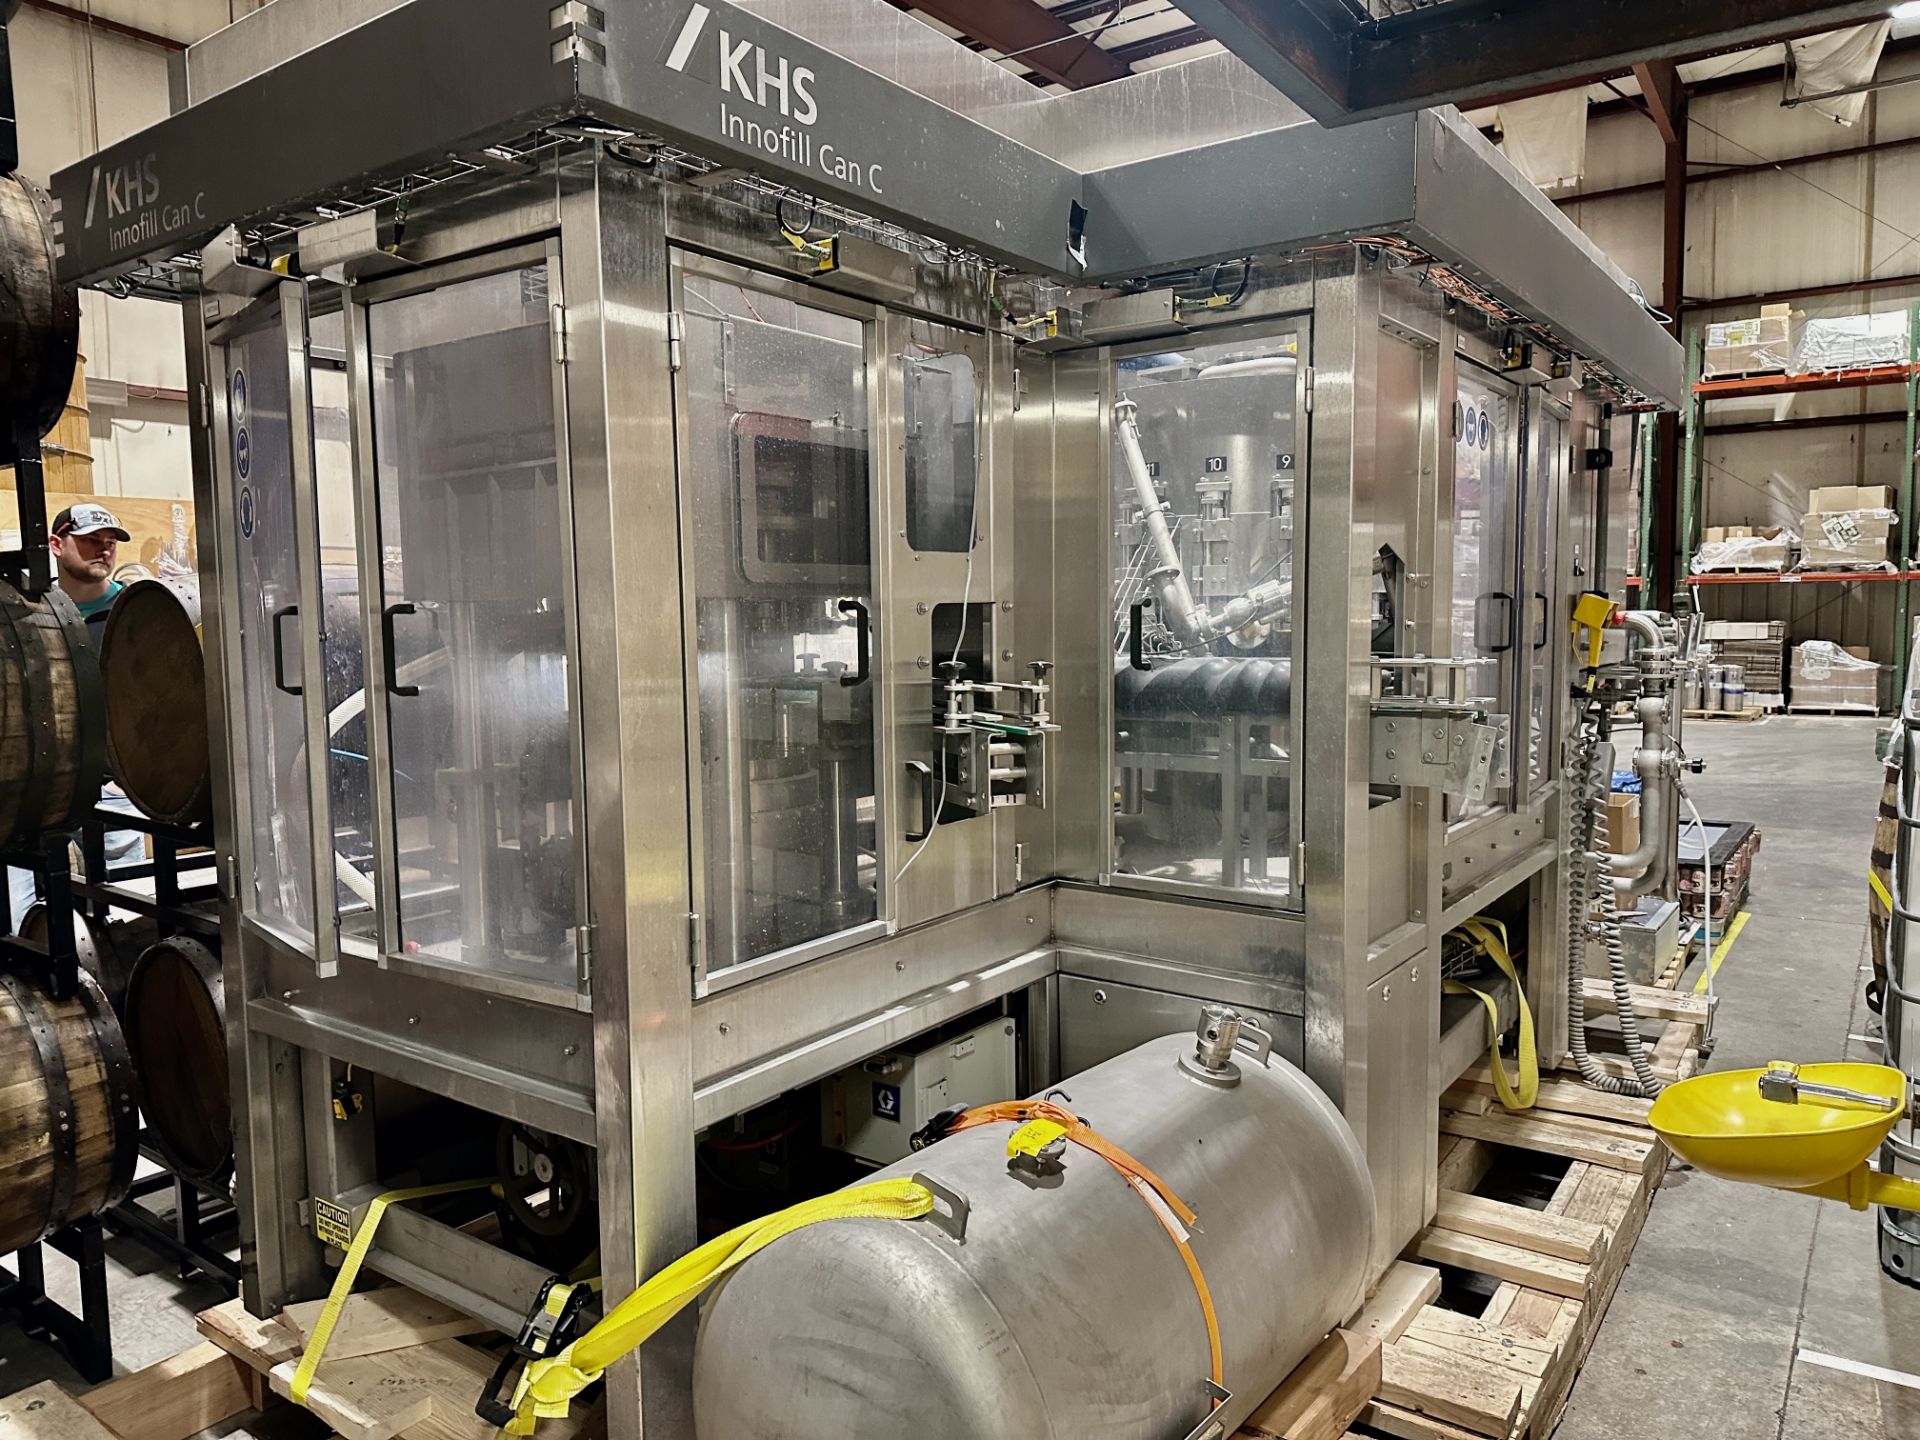 2019 KHS Innofill Can C Micro 18-Head Can Filler & 4-Head Seamer, Set for Sleek Can | Rig Fee $1840 - Image 8 of 21